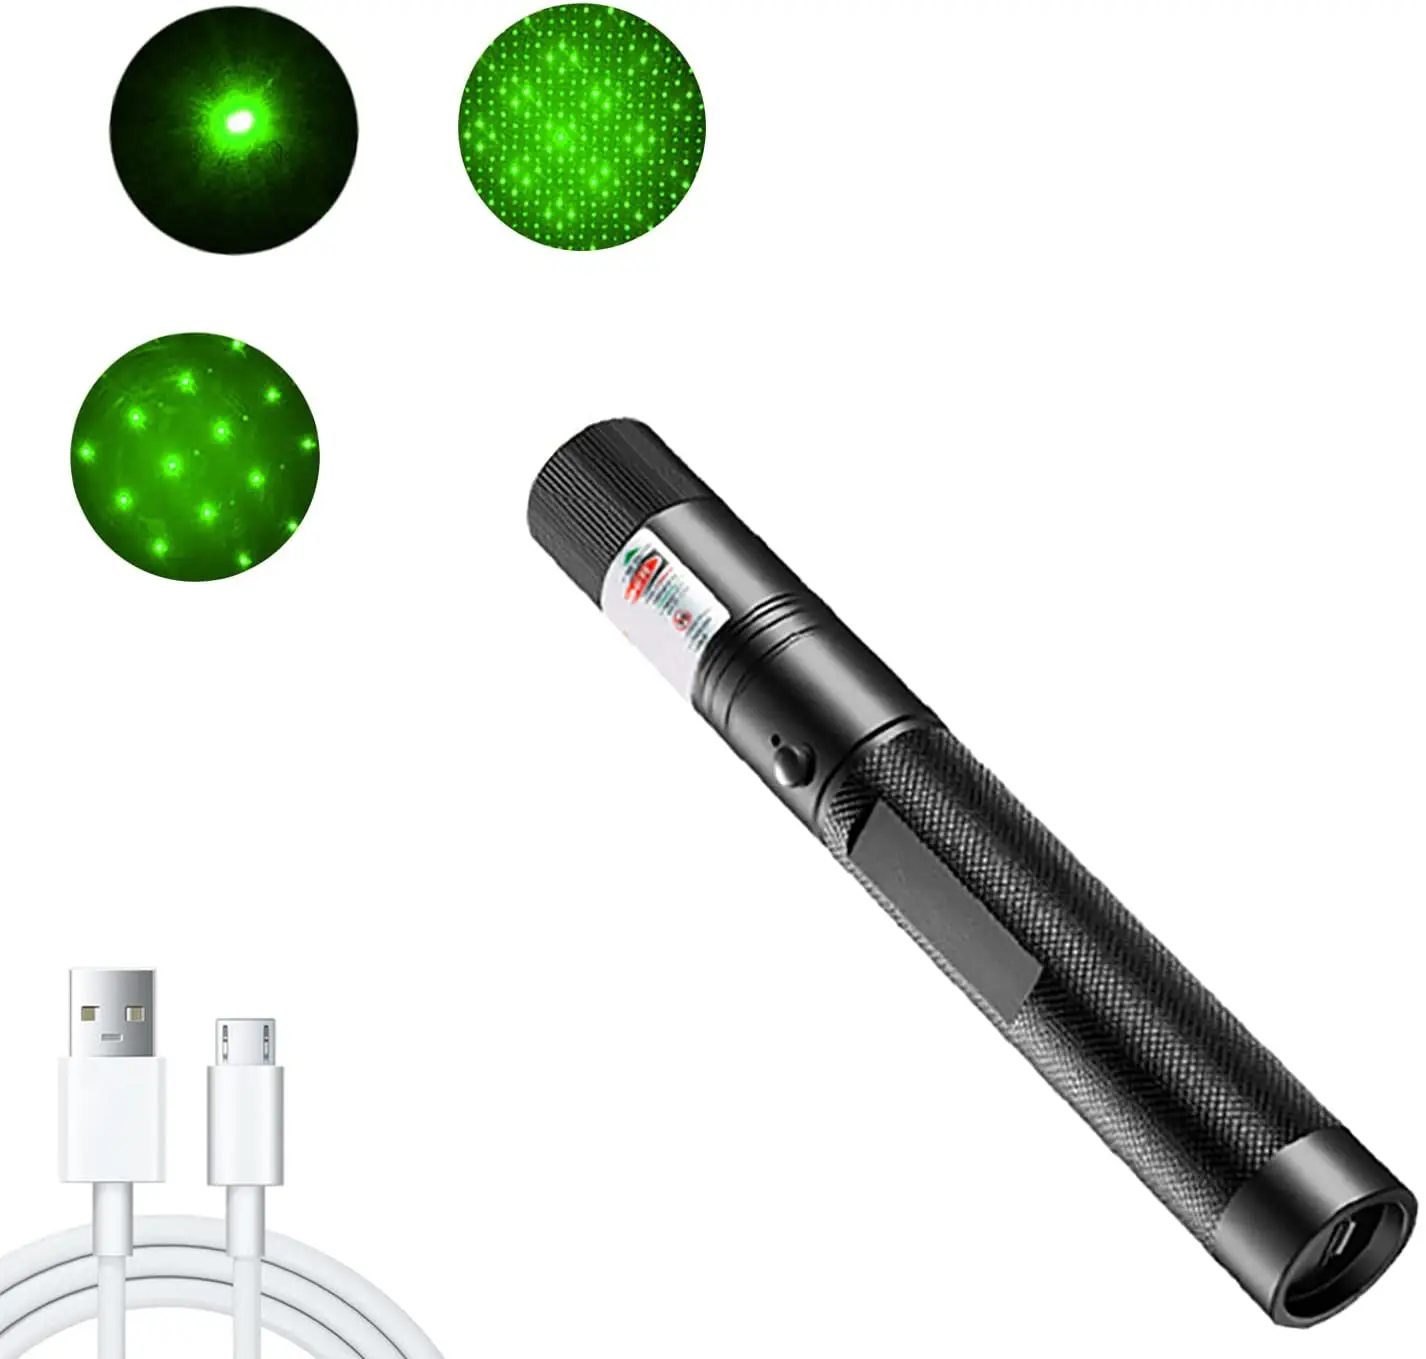 High Power 532nm Green/Red/Purple USB303 Laser Pointer 10000m Handheld Rechargeable Adjustable Focus with USB Cable